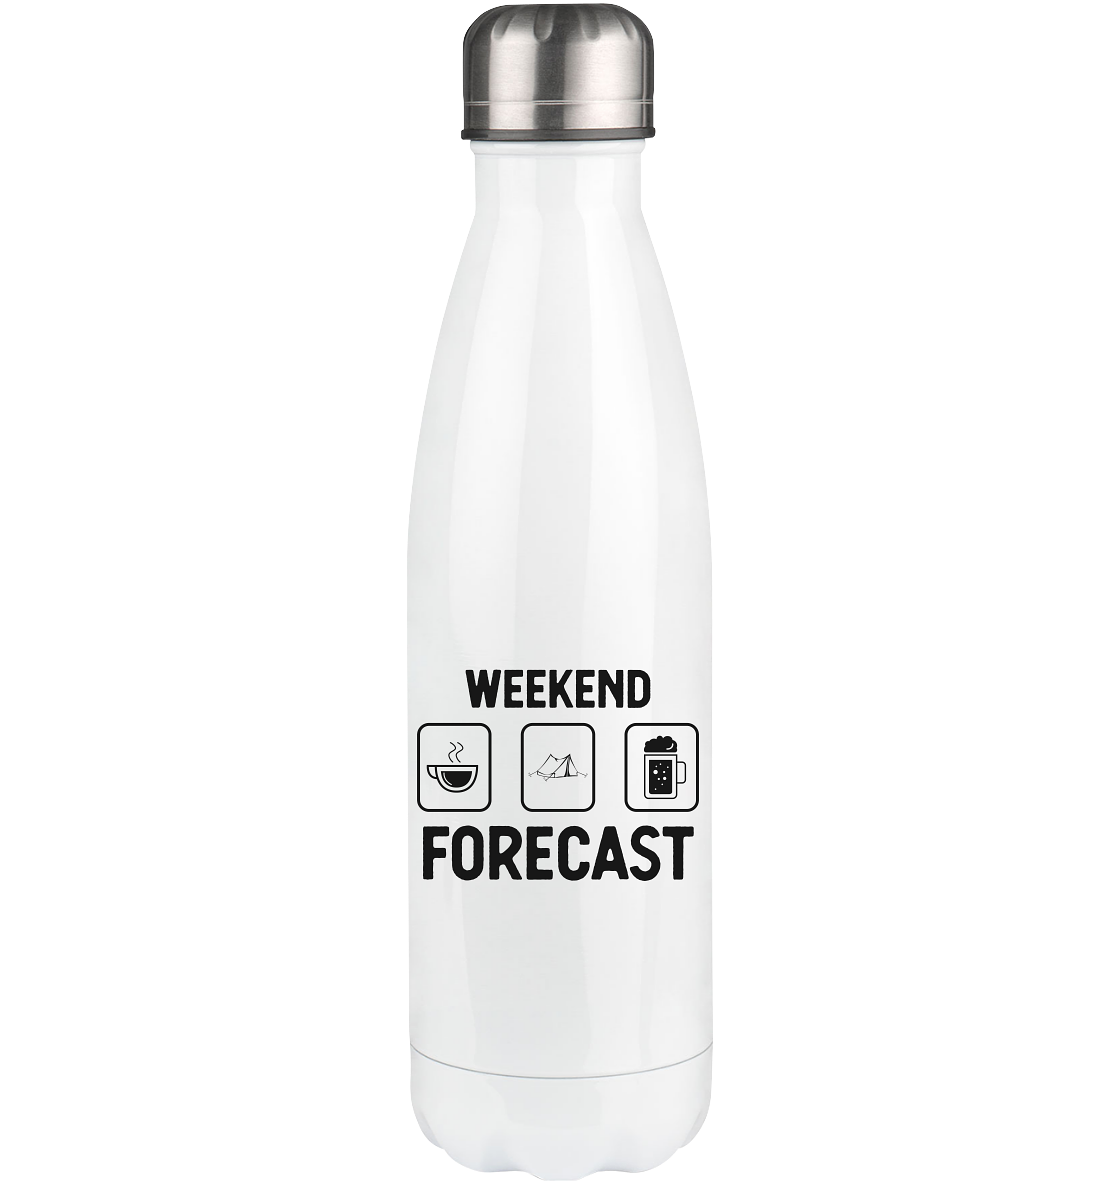 Weekend Forecast 1 - Edelstahl Thermosflasche camping 500ml